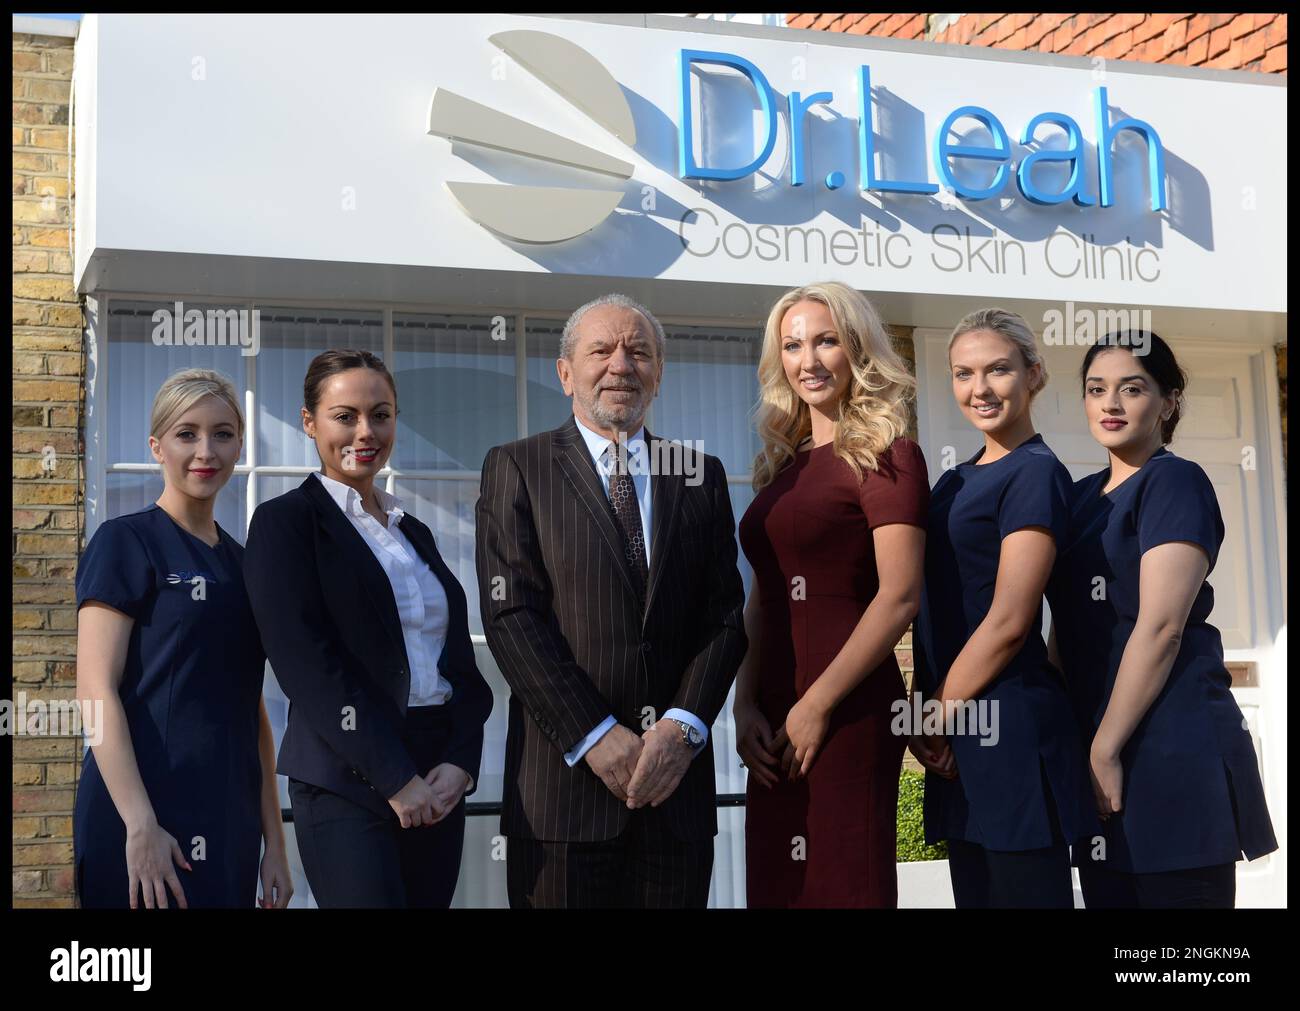 Image ©Licensed to Parsons Media. 04/03/2016. London, United Kingdom. Apprentice winner Dr Leah Totton and Lord Alan Sugar.   Apprentice winner Dr Leah Totton and Lord Alan Sugar. Dr Leah Totton alongside Lord Alan Sugar for the opening of her second clinic in Loughton  Picture by Andrew Parsons / Parsons Media Stock Photo